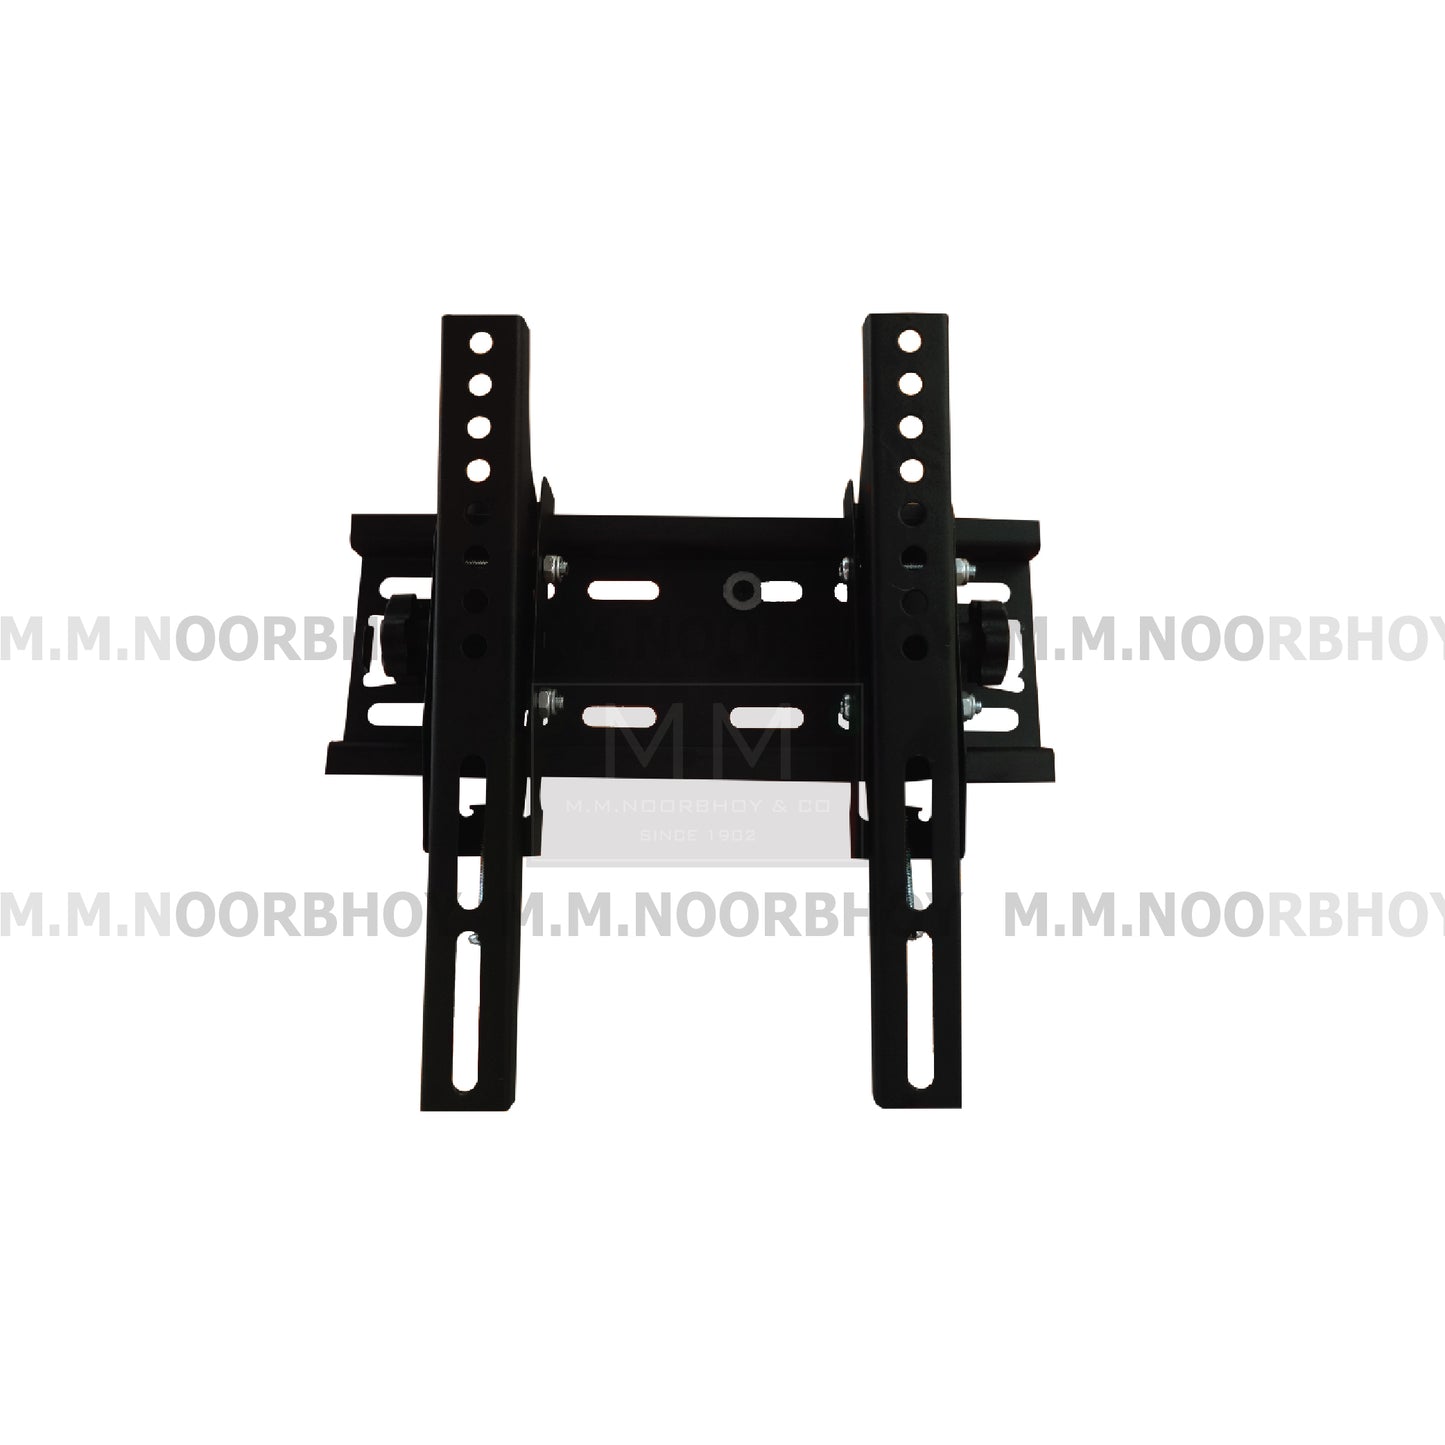 Mcoco Universal Wallmount TV Bracket Up to 60 Inches Black Colour - PL30026A